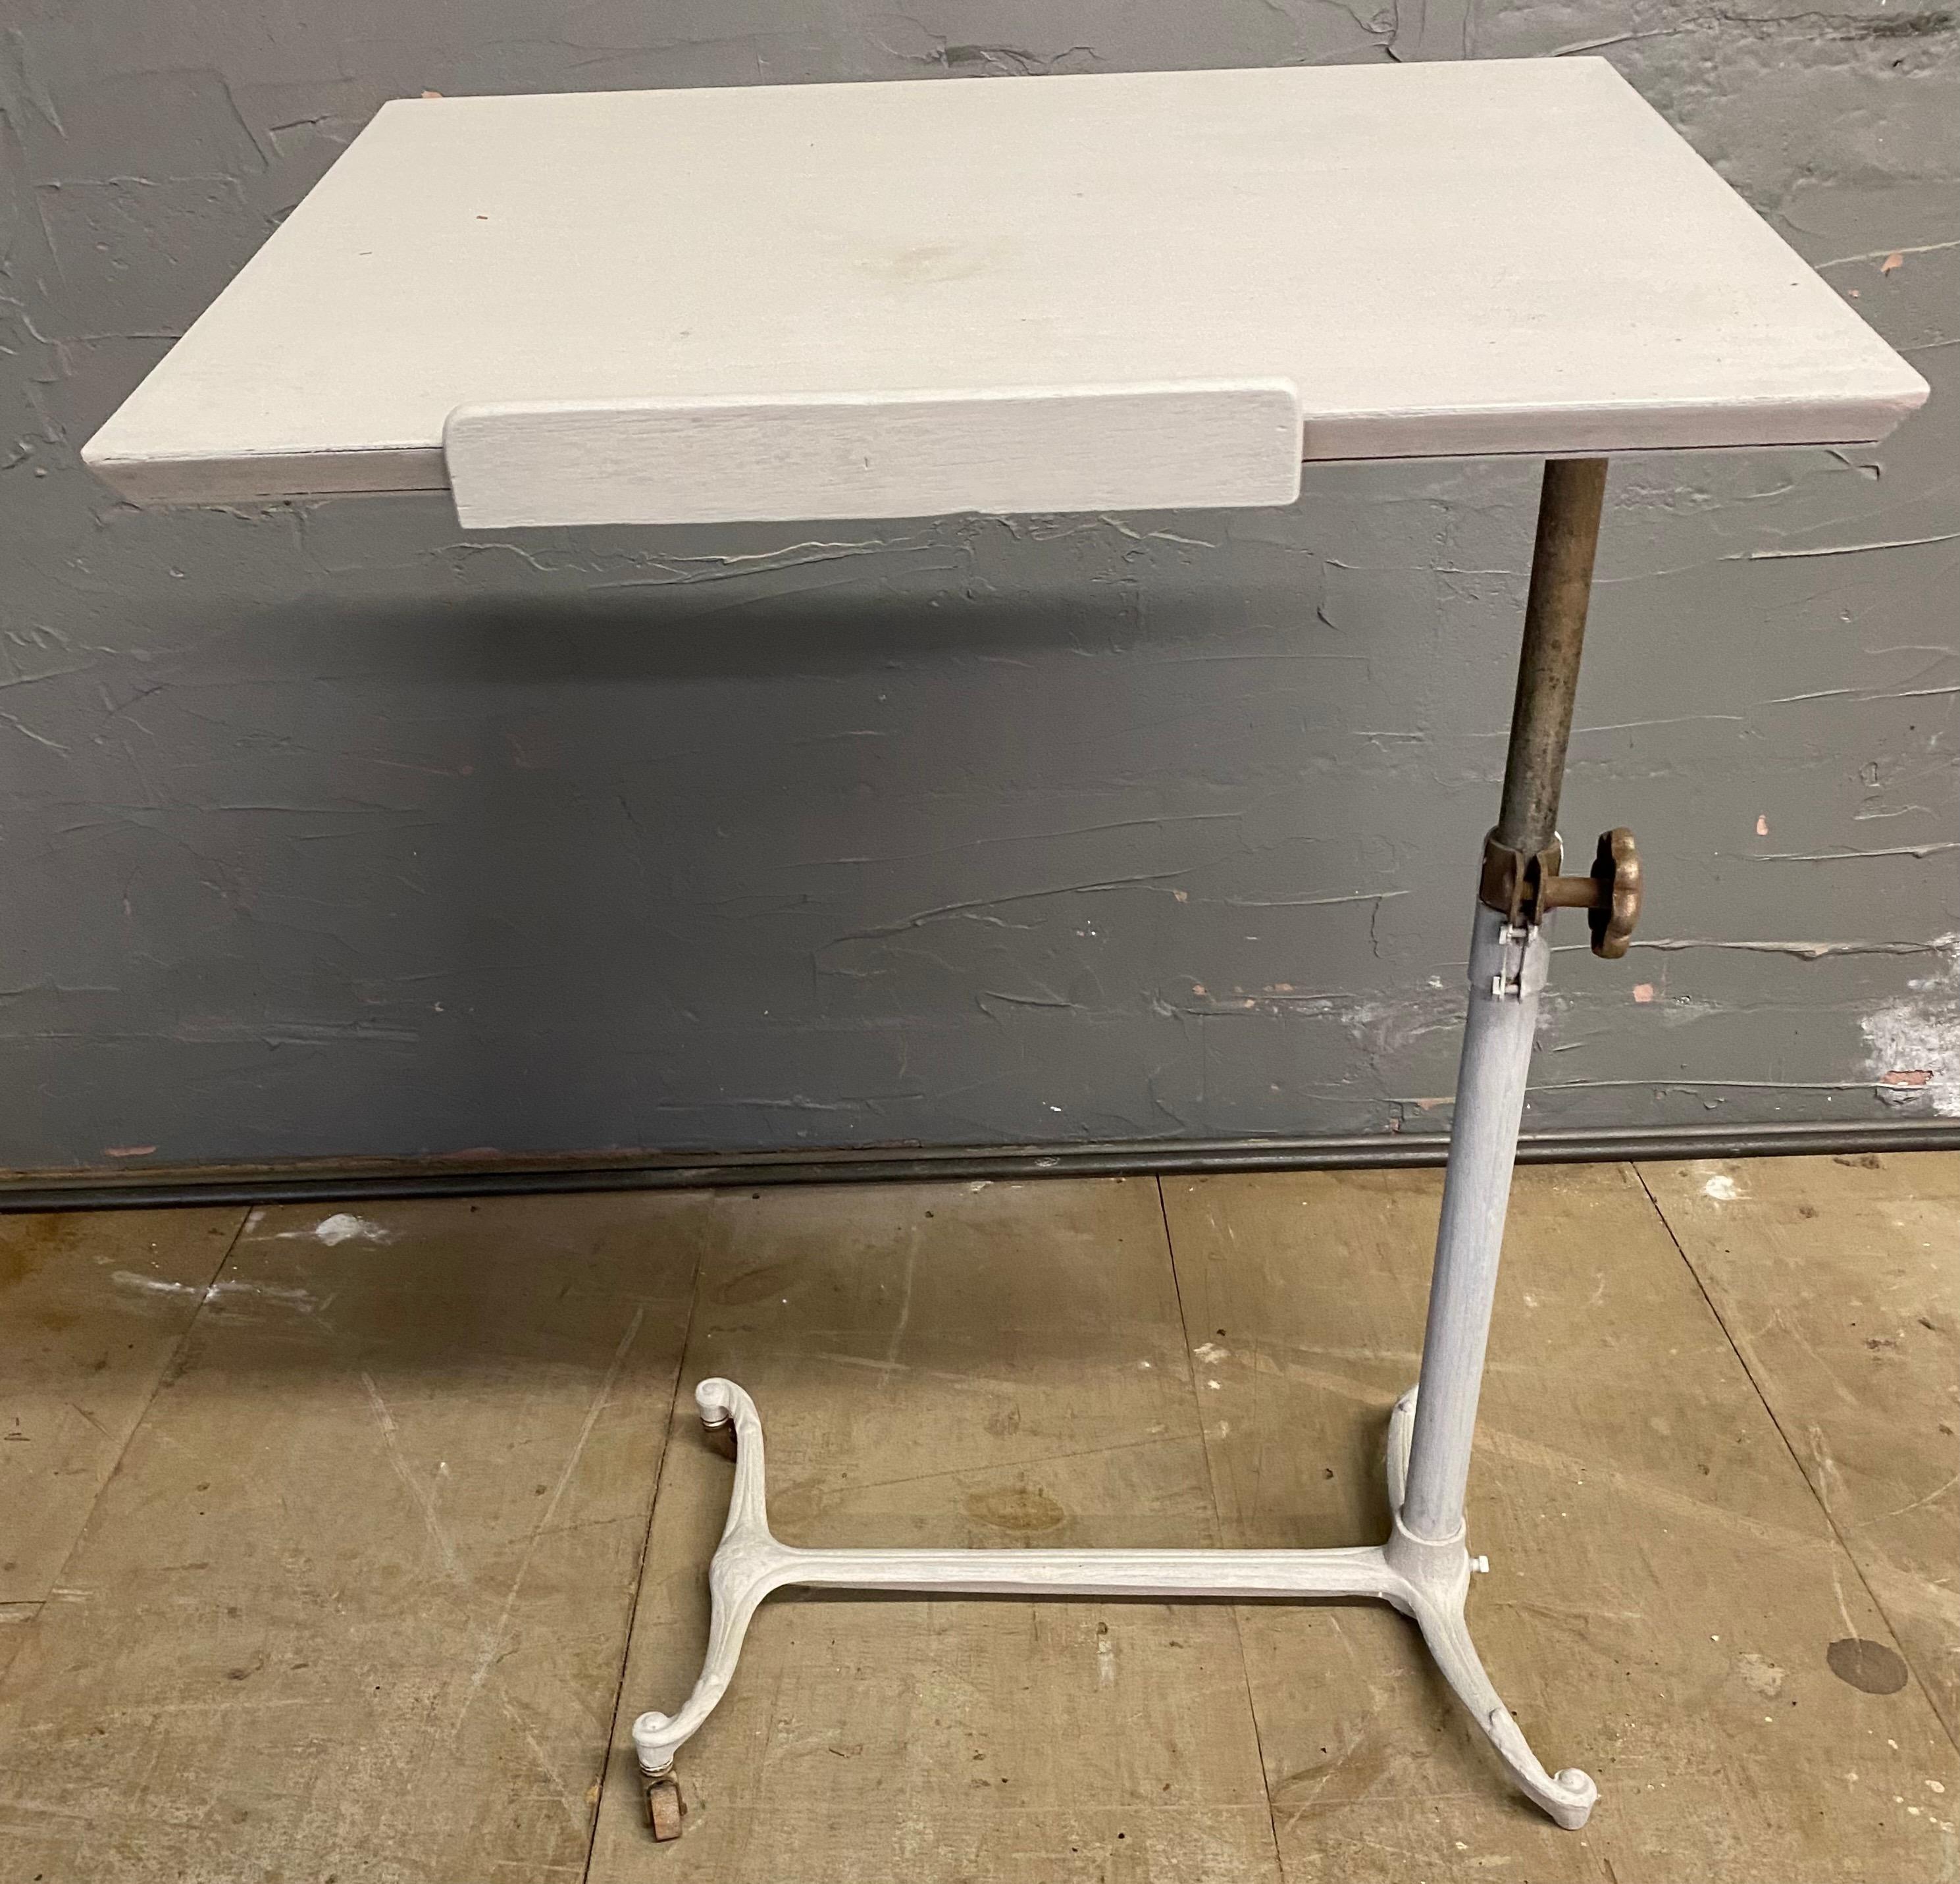 Antique adjustable tilt-top table with cast iron base with painted wood work or table surface that lends itself to be used as an end table, side table, bedside table or nightstand. Height (when top is flat) can be raised or lowered from 24.5 - 40